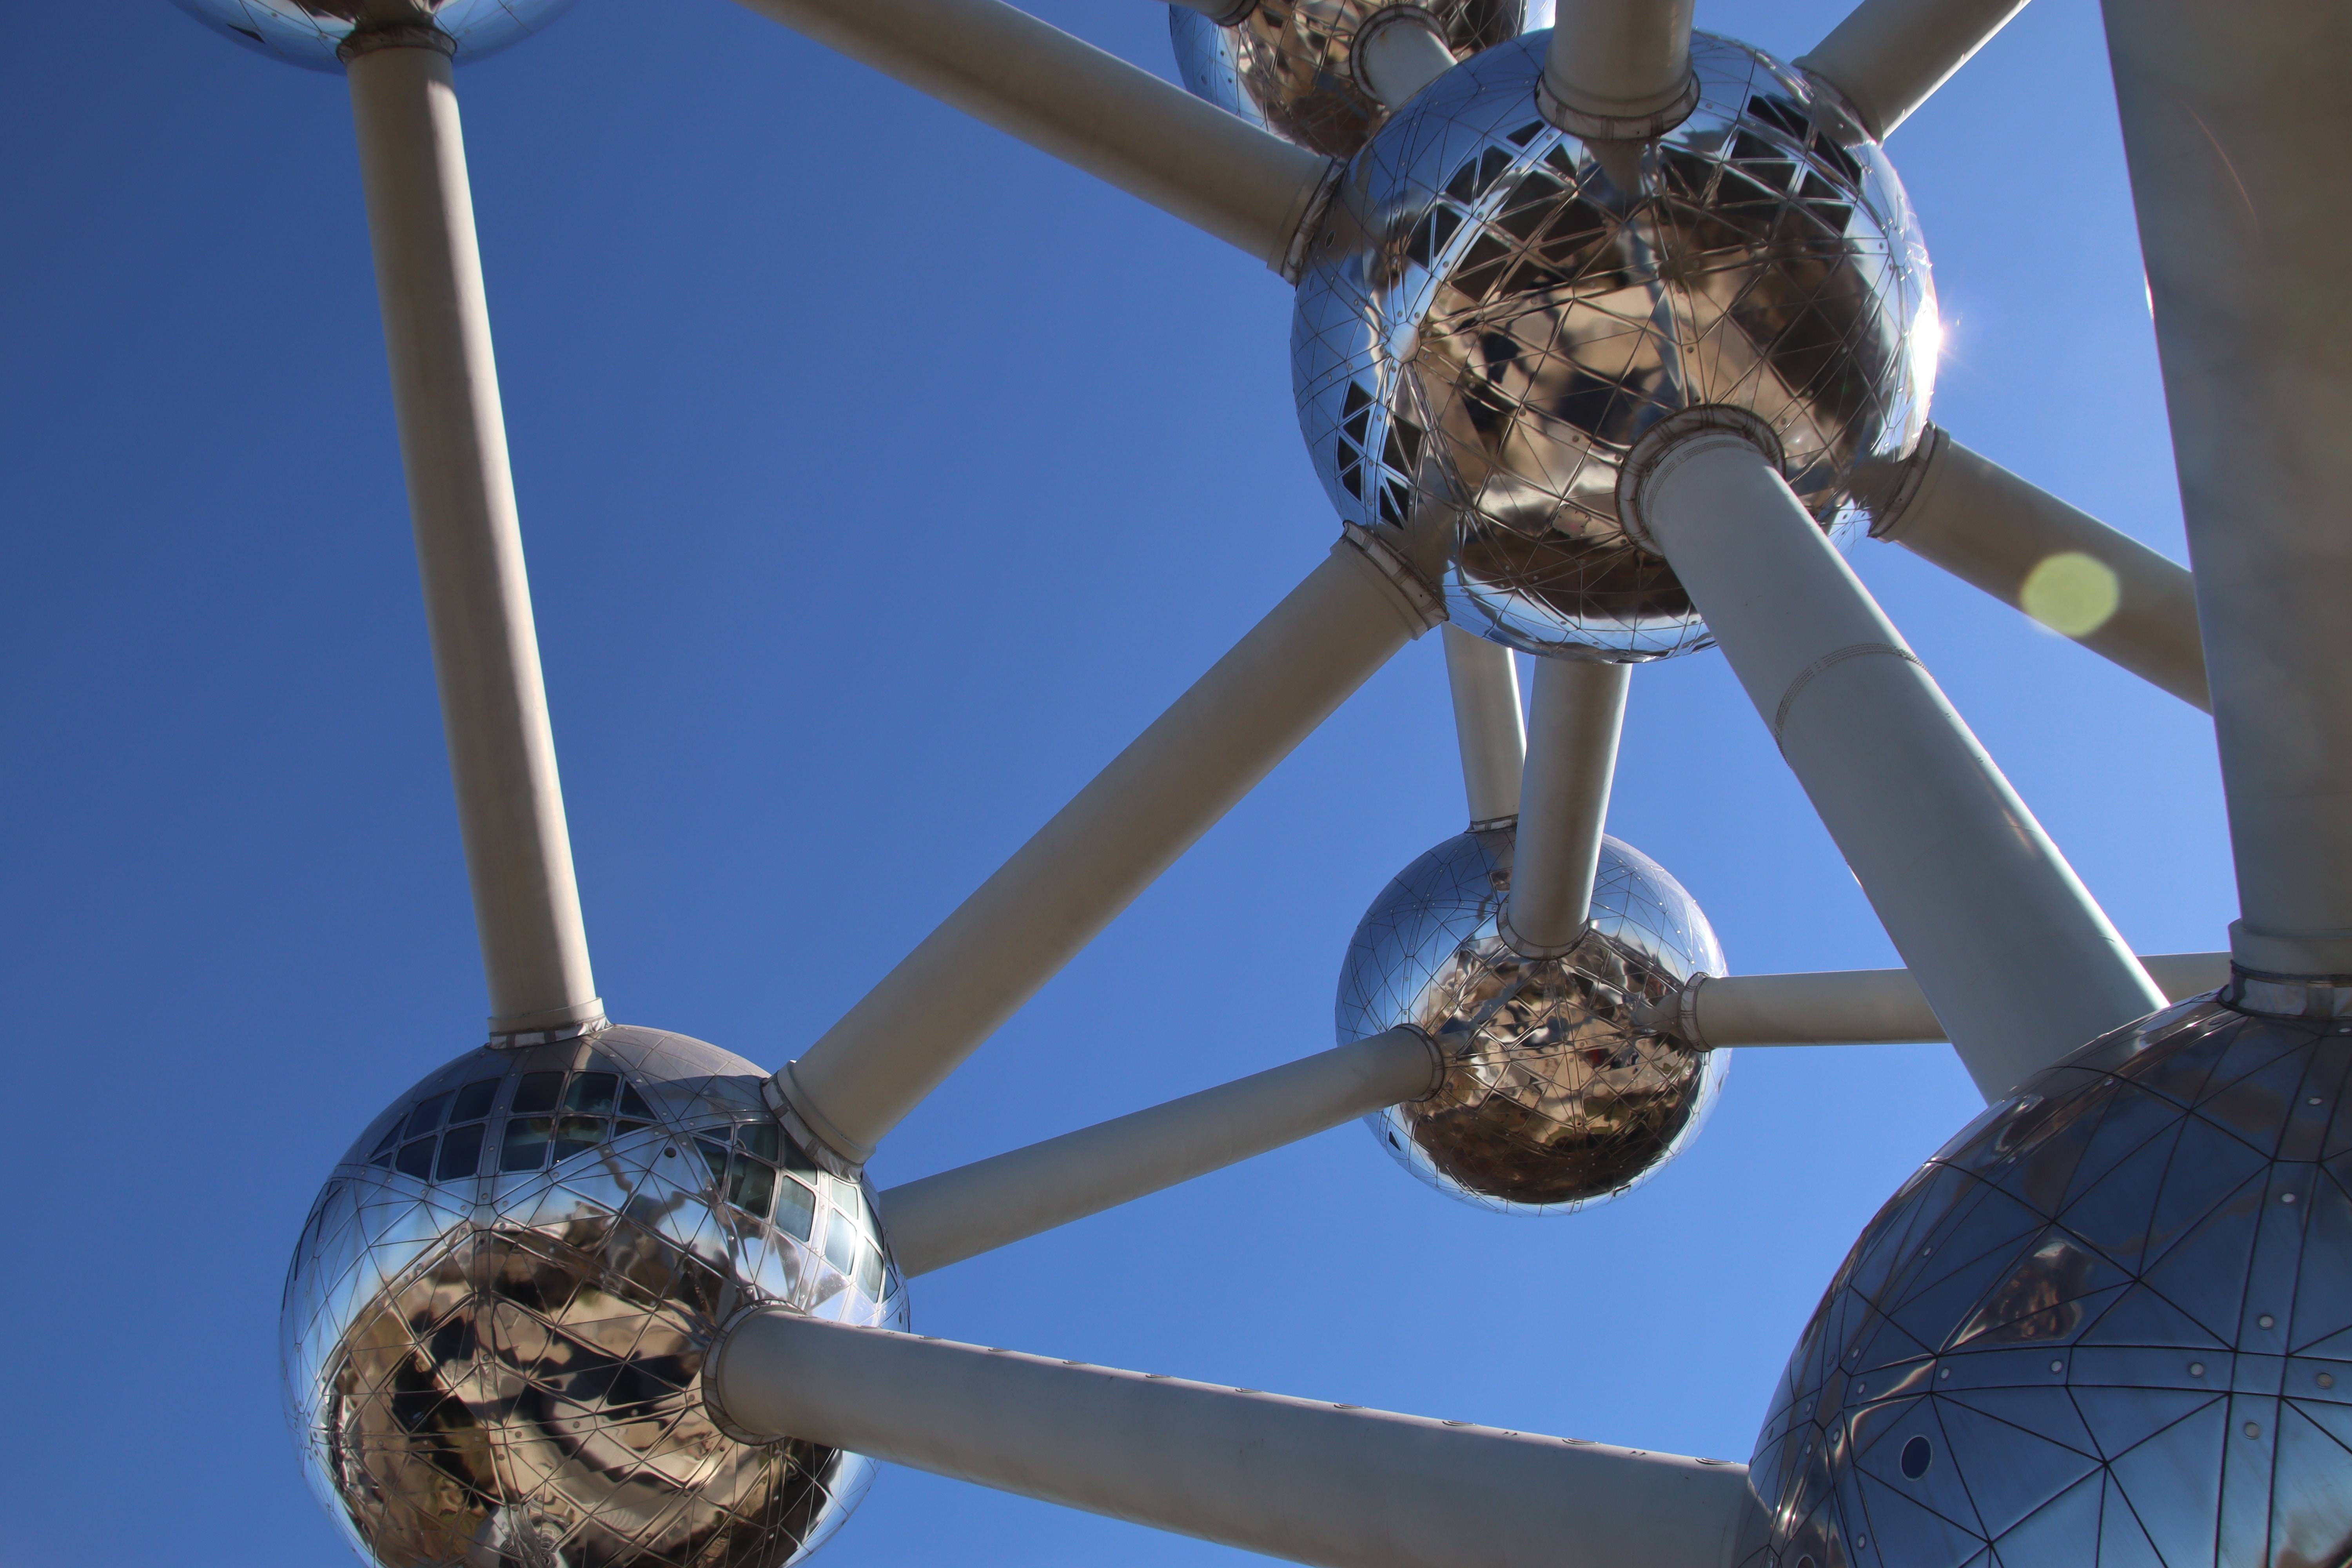 What You Need to Know about the EU’s Sustainable Finance Regulations